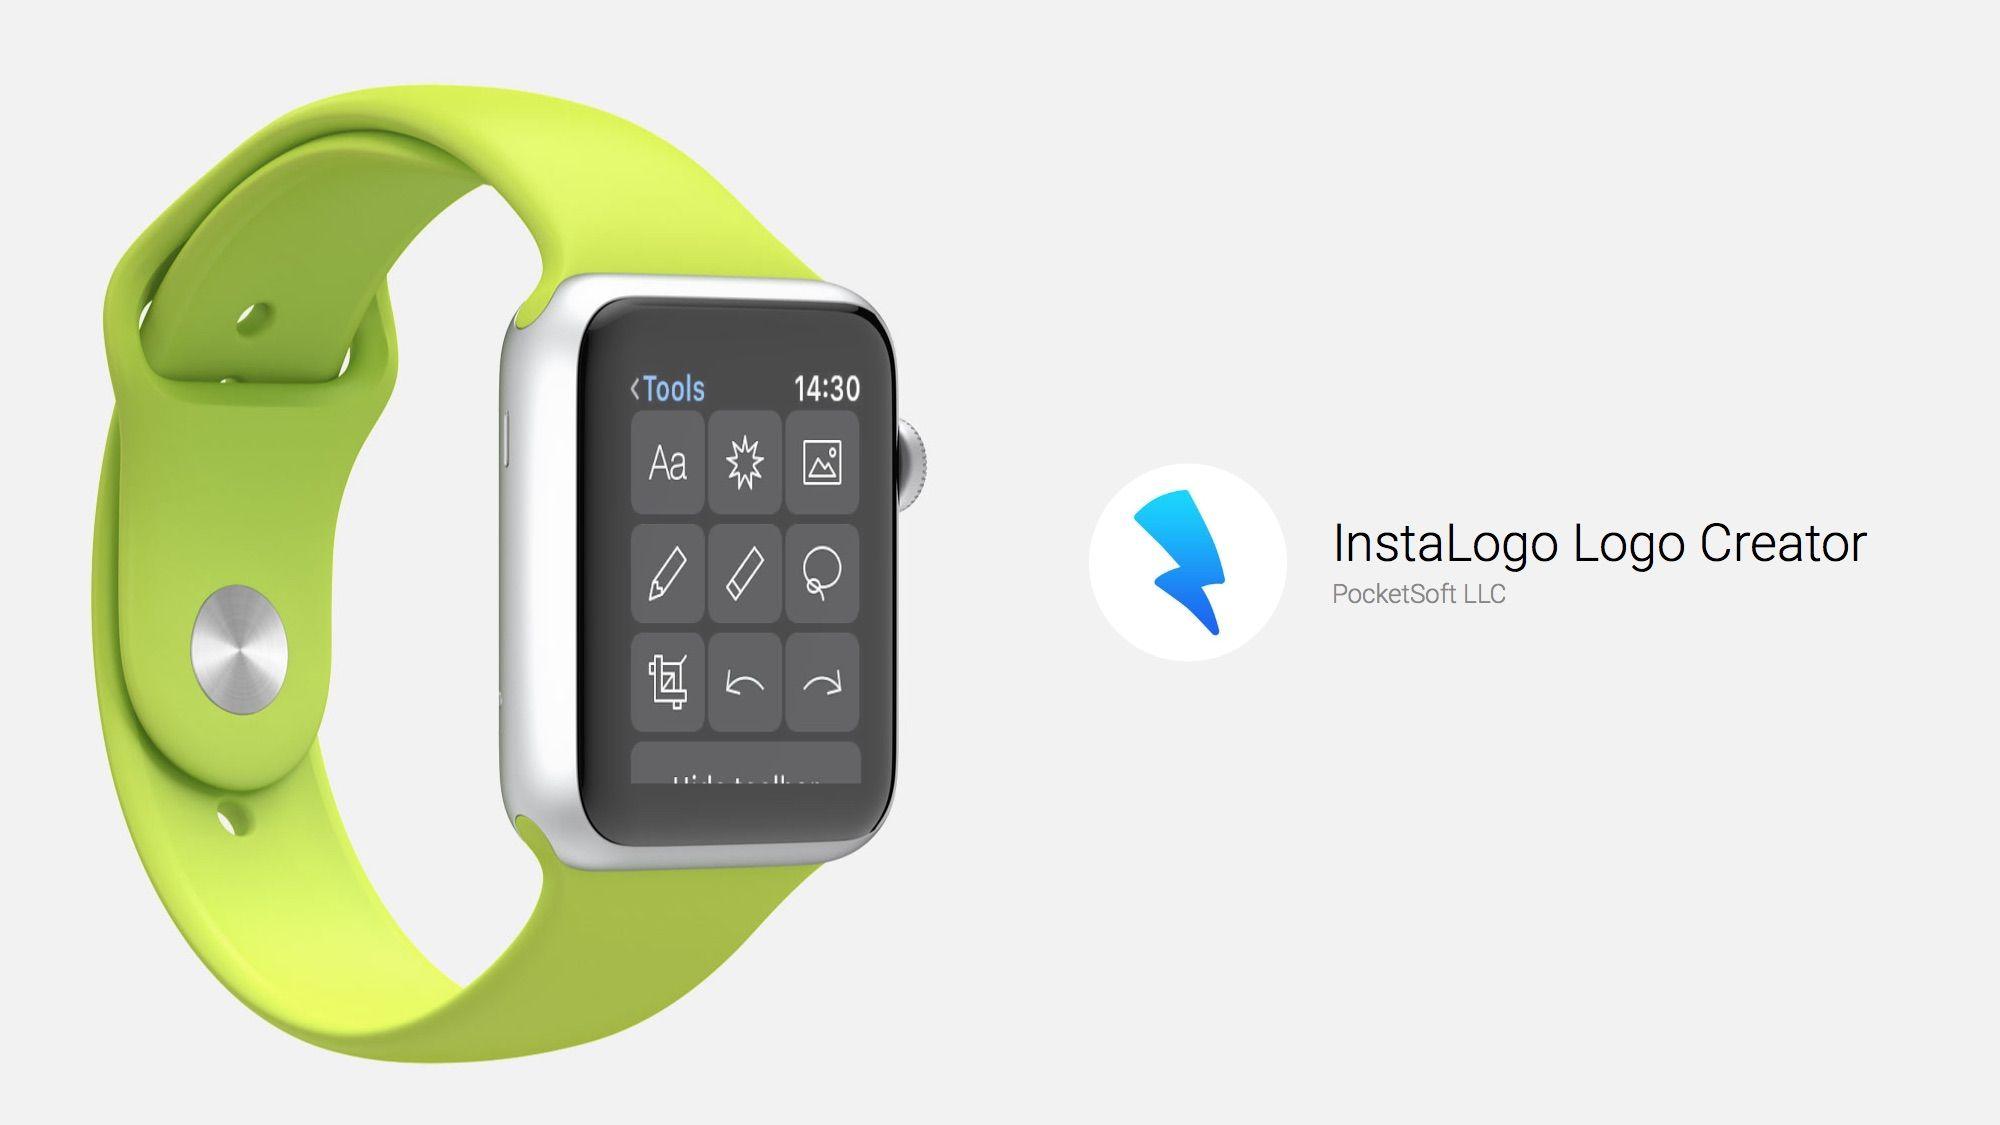 Instalogo Logo - Use Your Apple Watch As a Second Display With InstaLogo | Watchaware